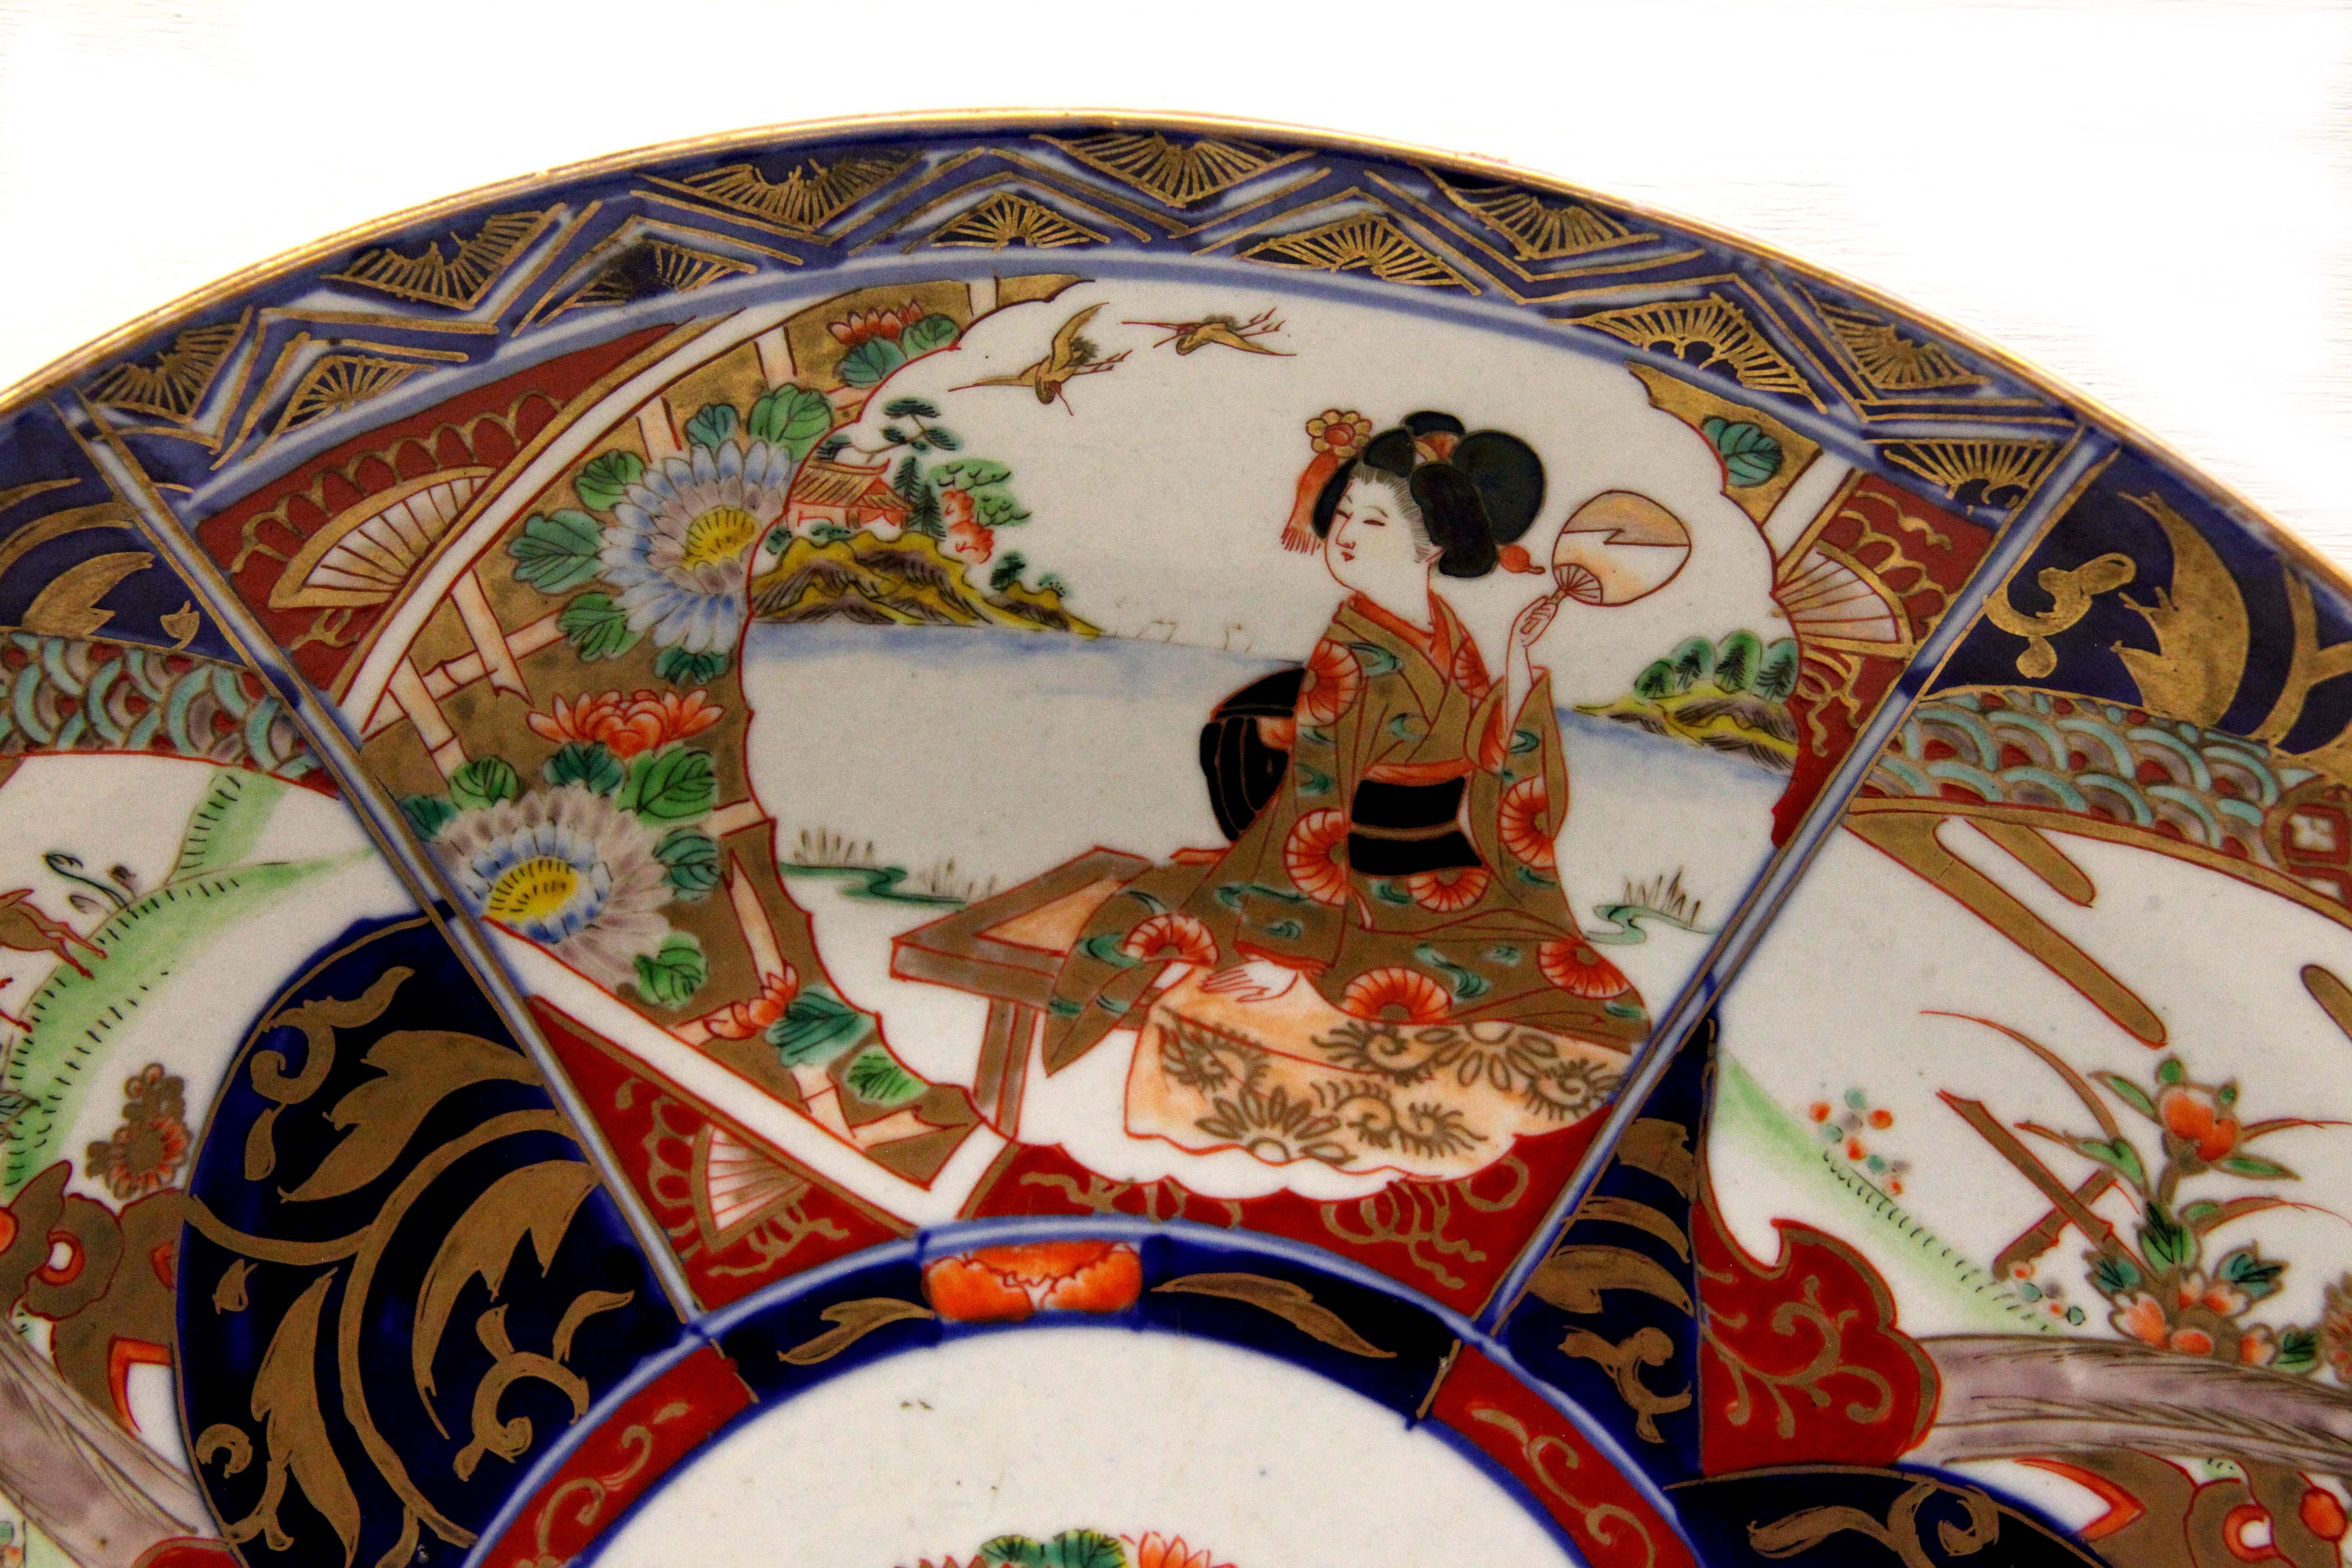 19th century Imari charger, with floral center surrounded by alternating scenes depicting a lady and deer.